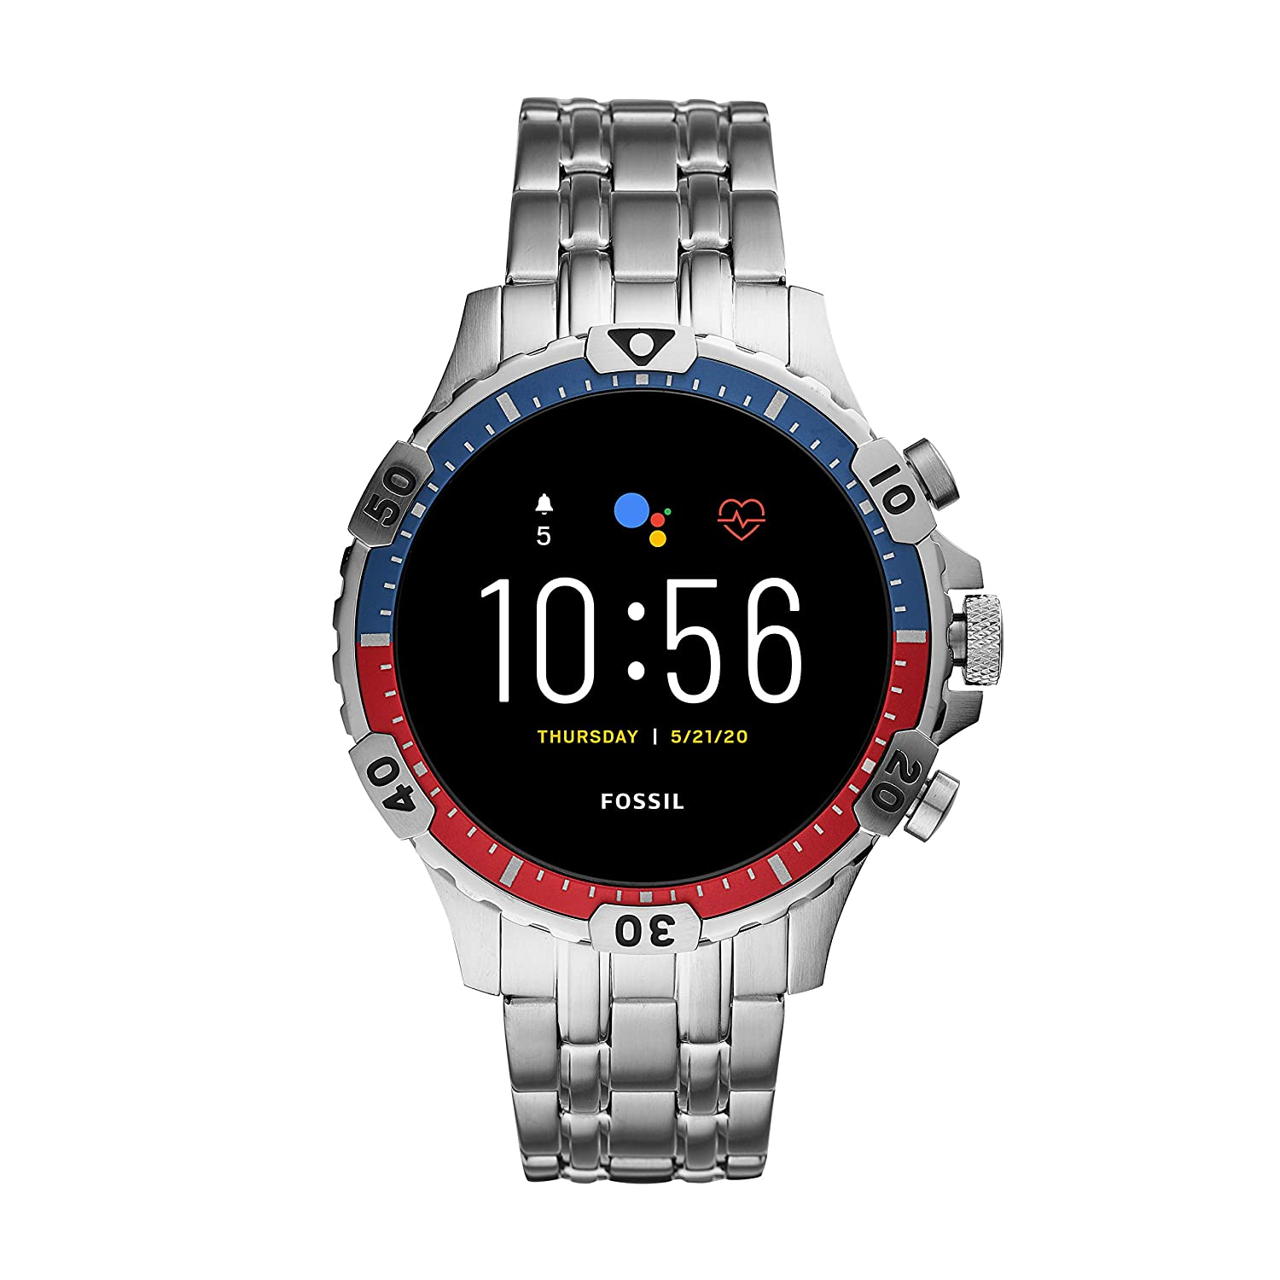 Fossil Gen 5 Carlyle Touchscreen Smartwatch with Speaker, Heart Rate, GPS and Smartphone Notifications - FTW4026